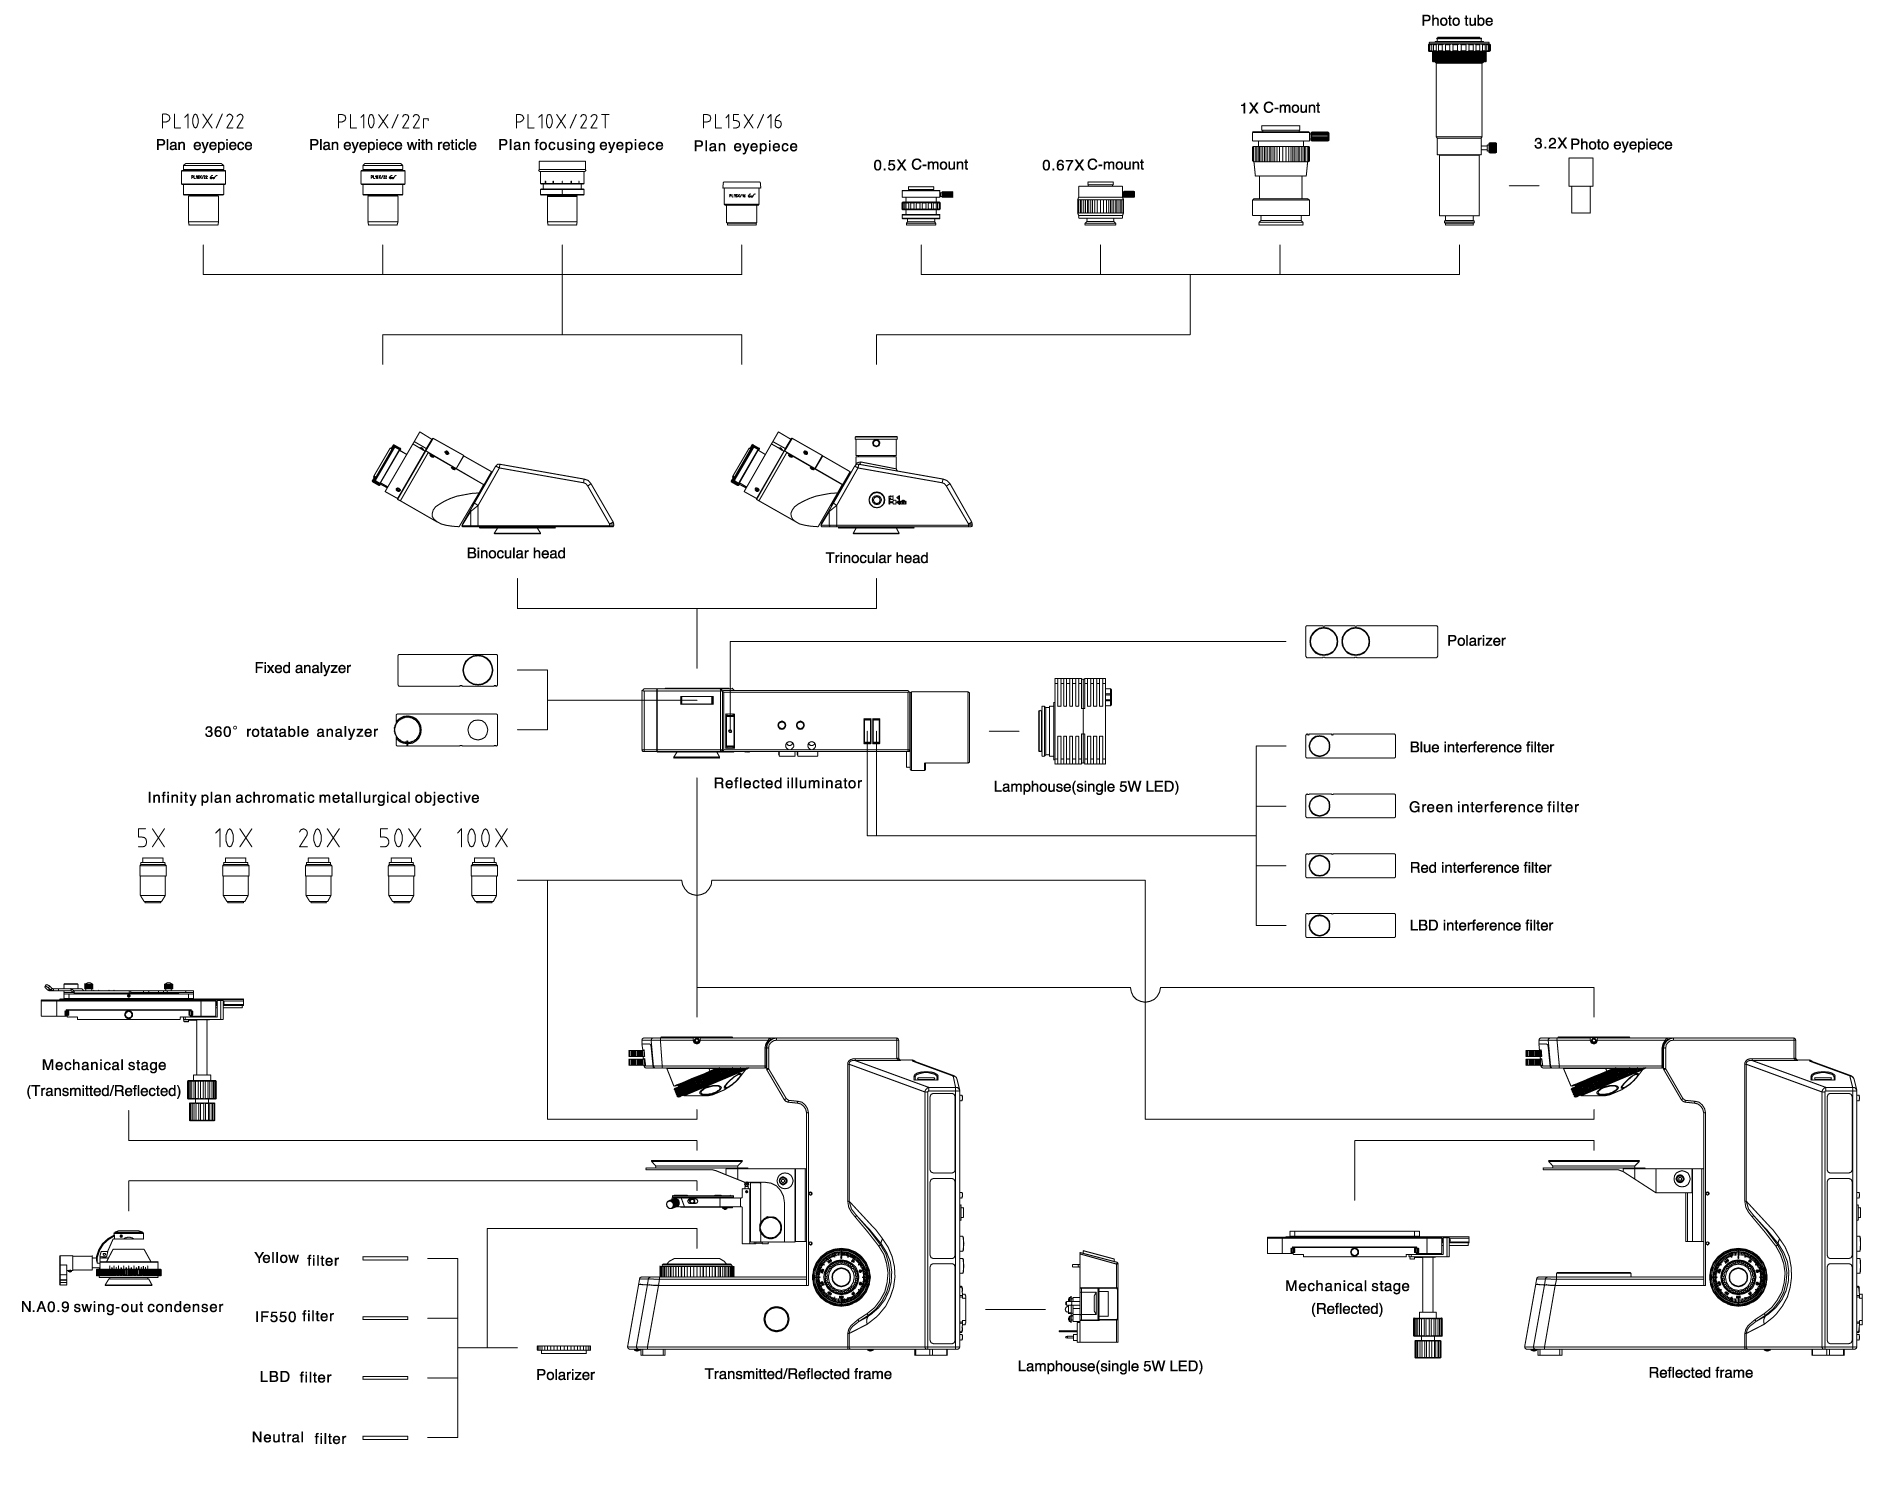 BS-6012 systemdiagram